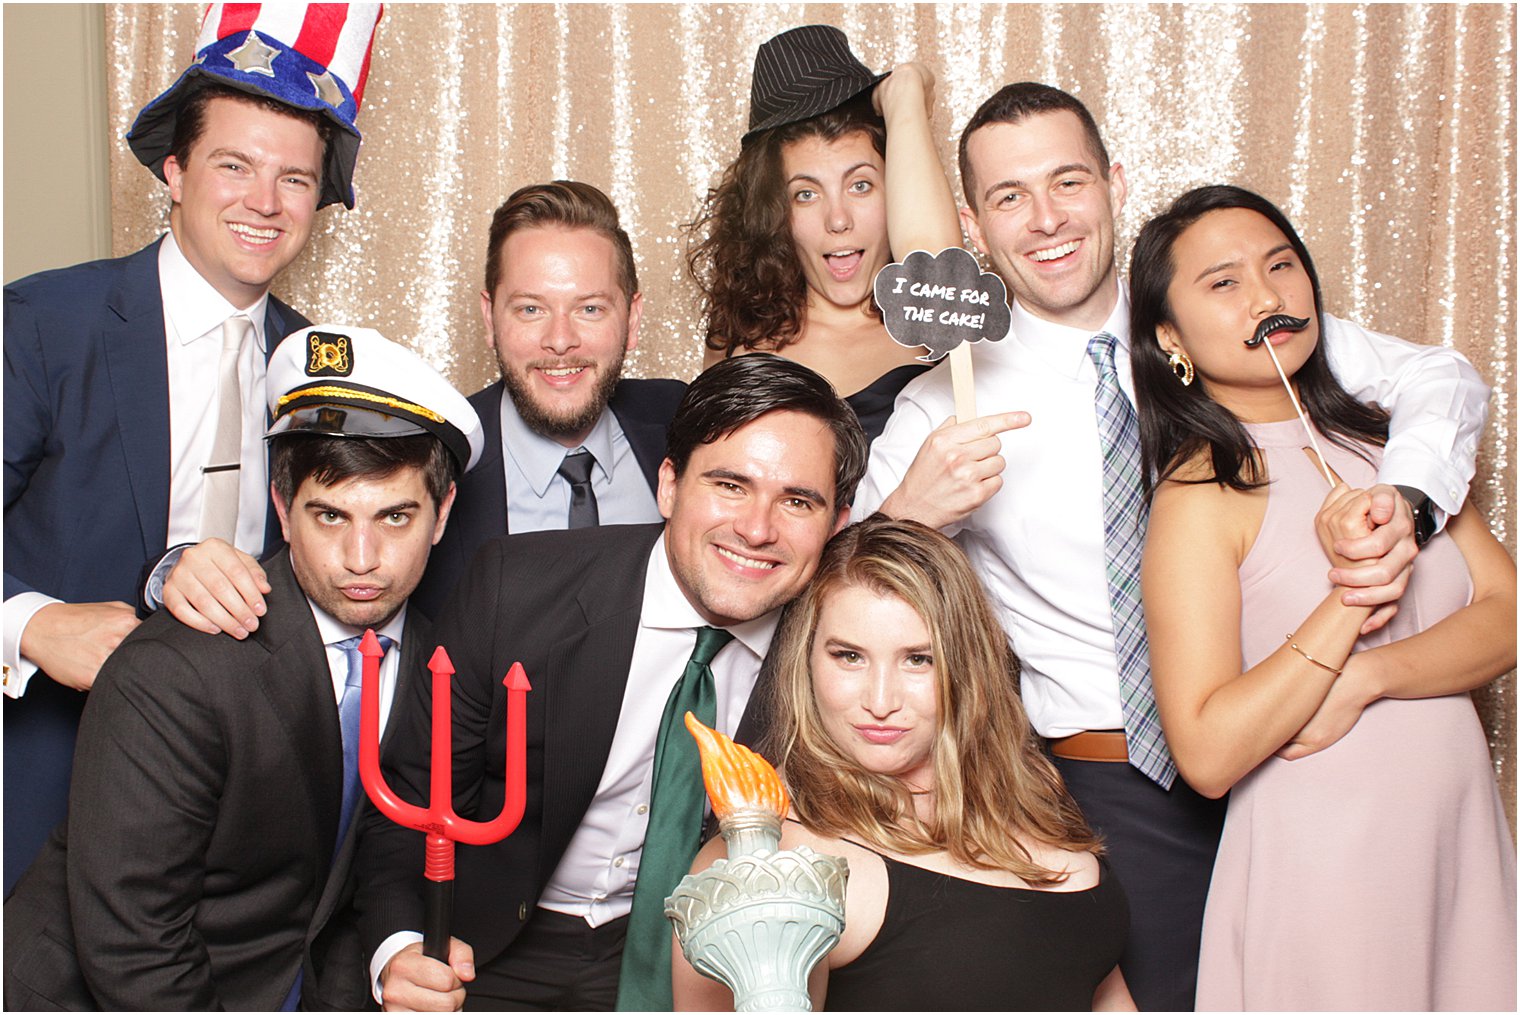 group poses in photo booth during NJ wedding reception